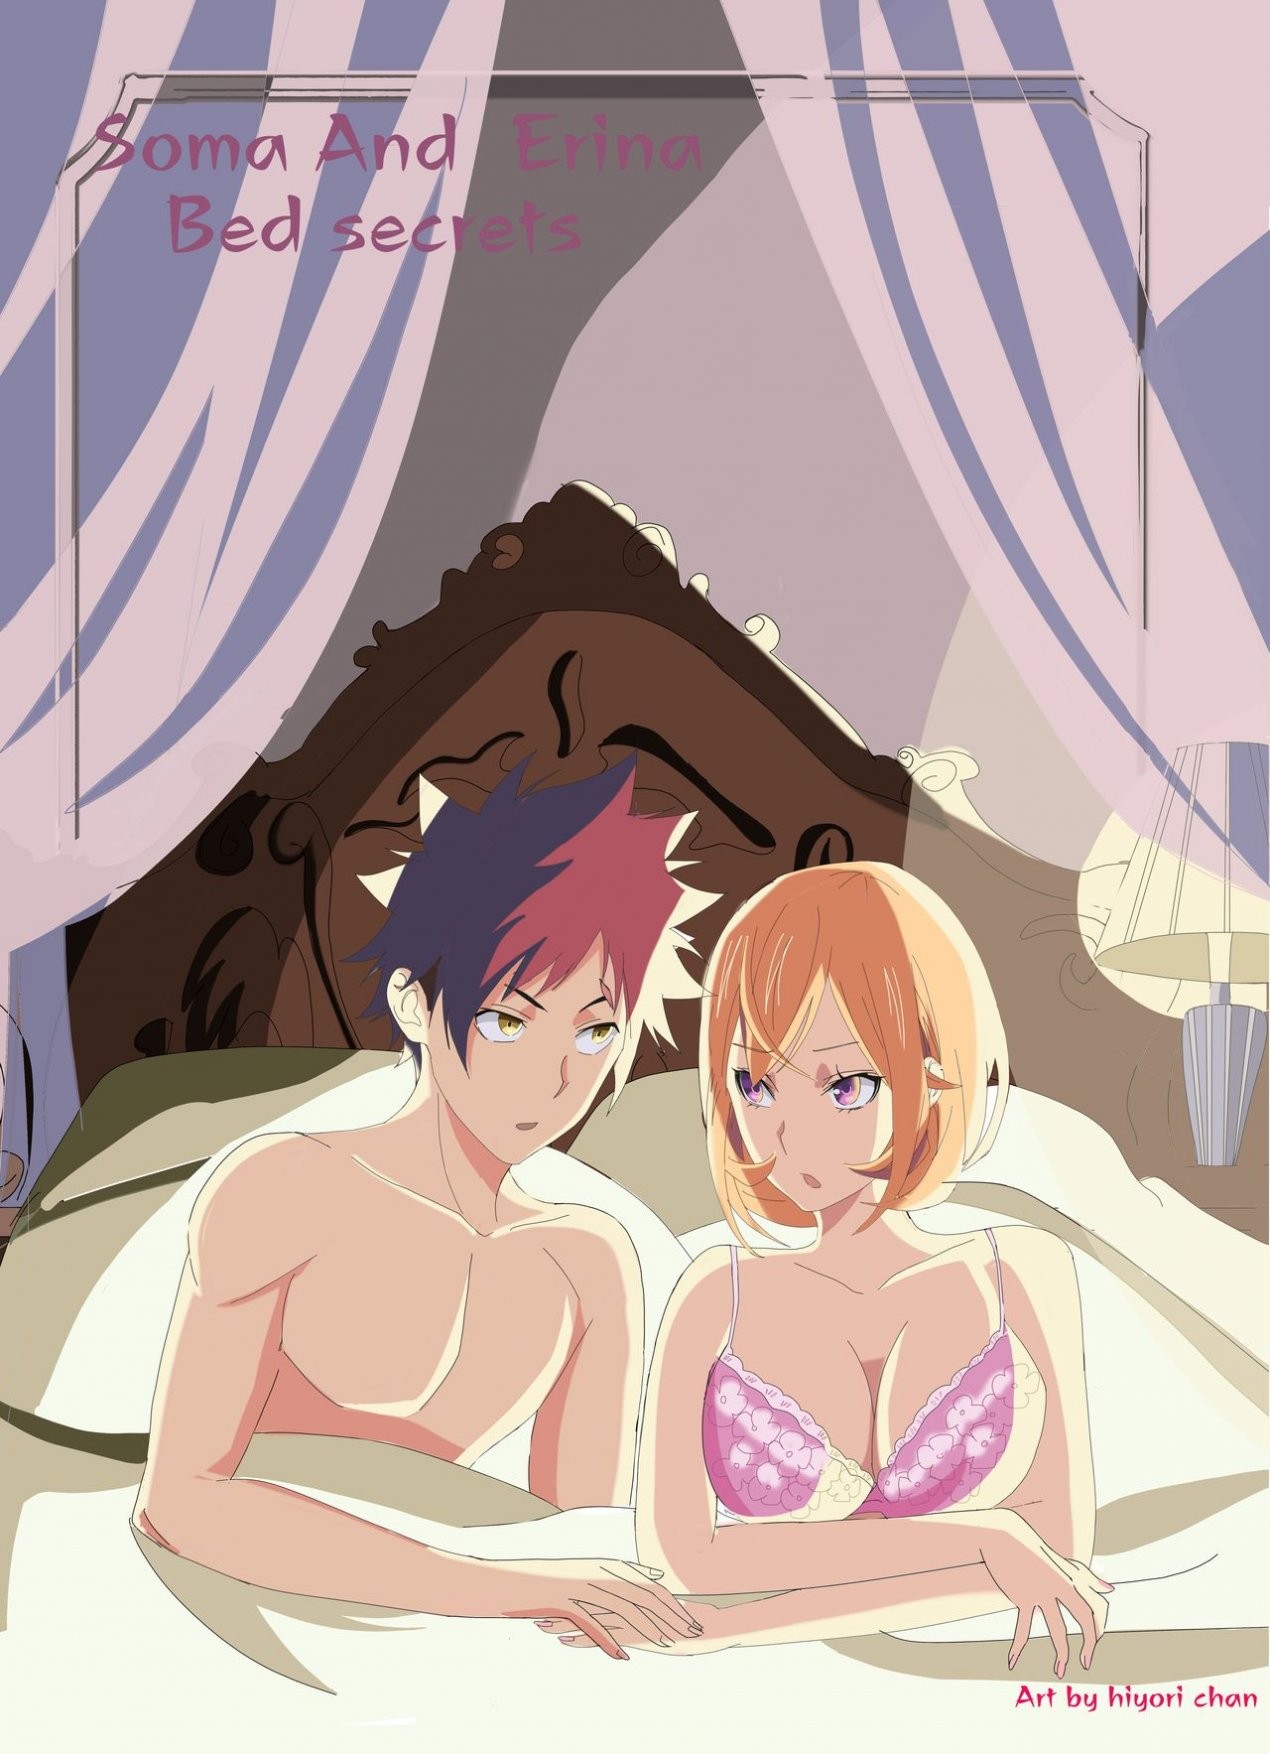 Soma and Erina bed secrets porn comic picture 1